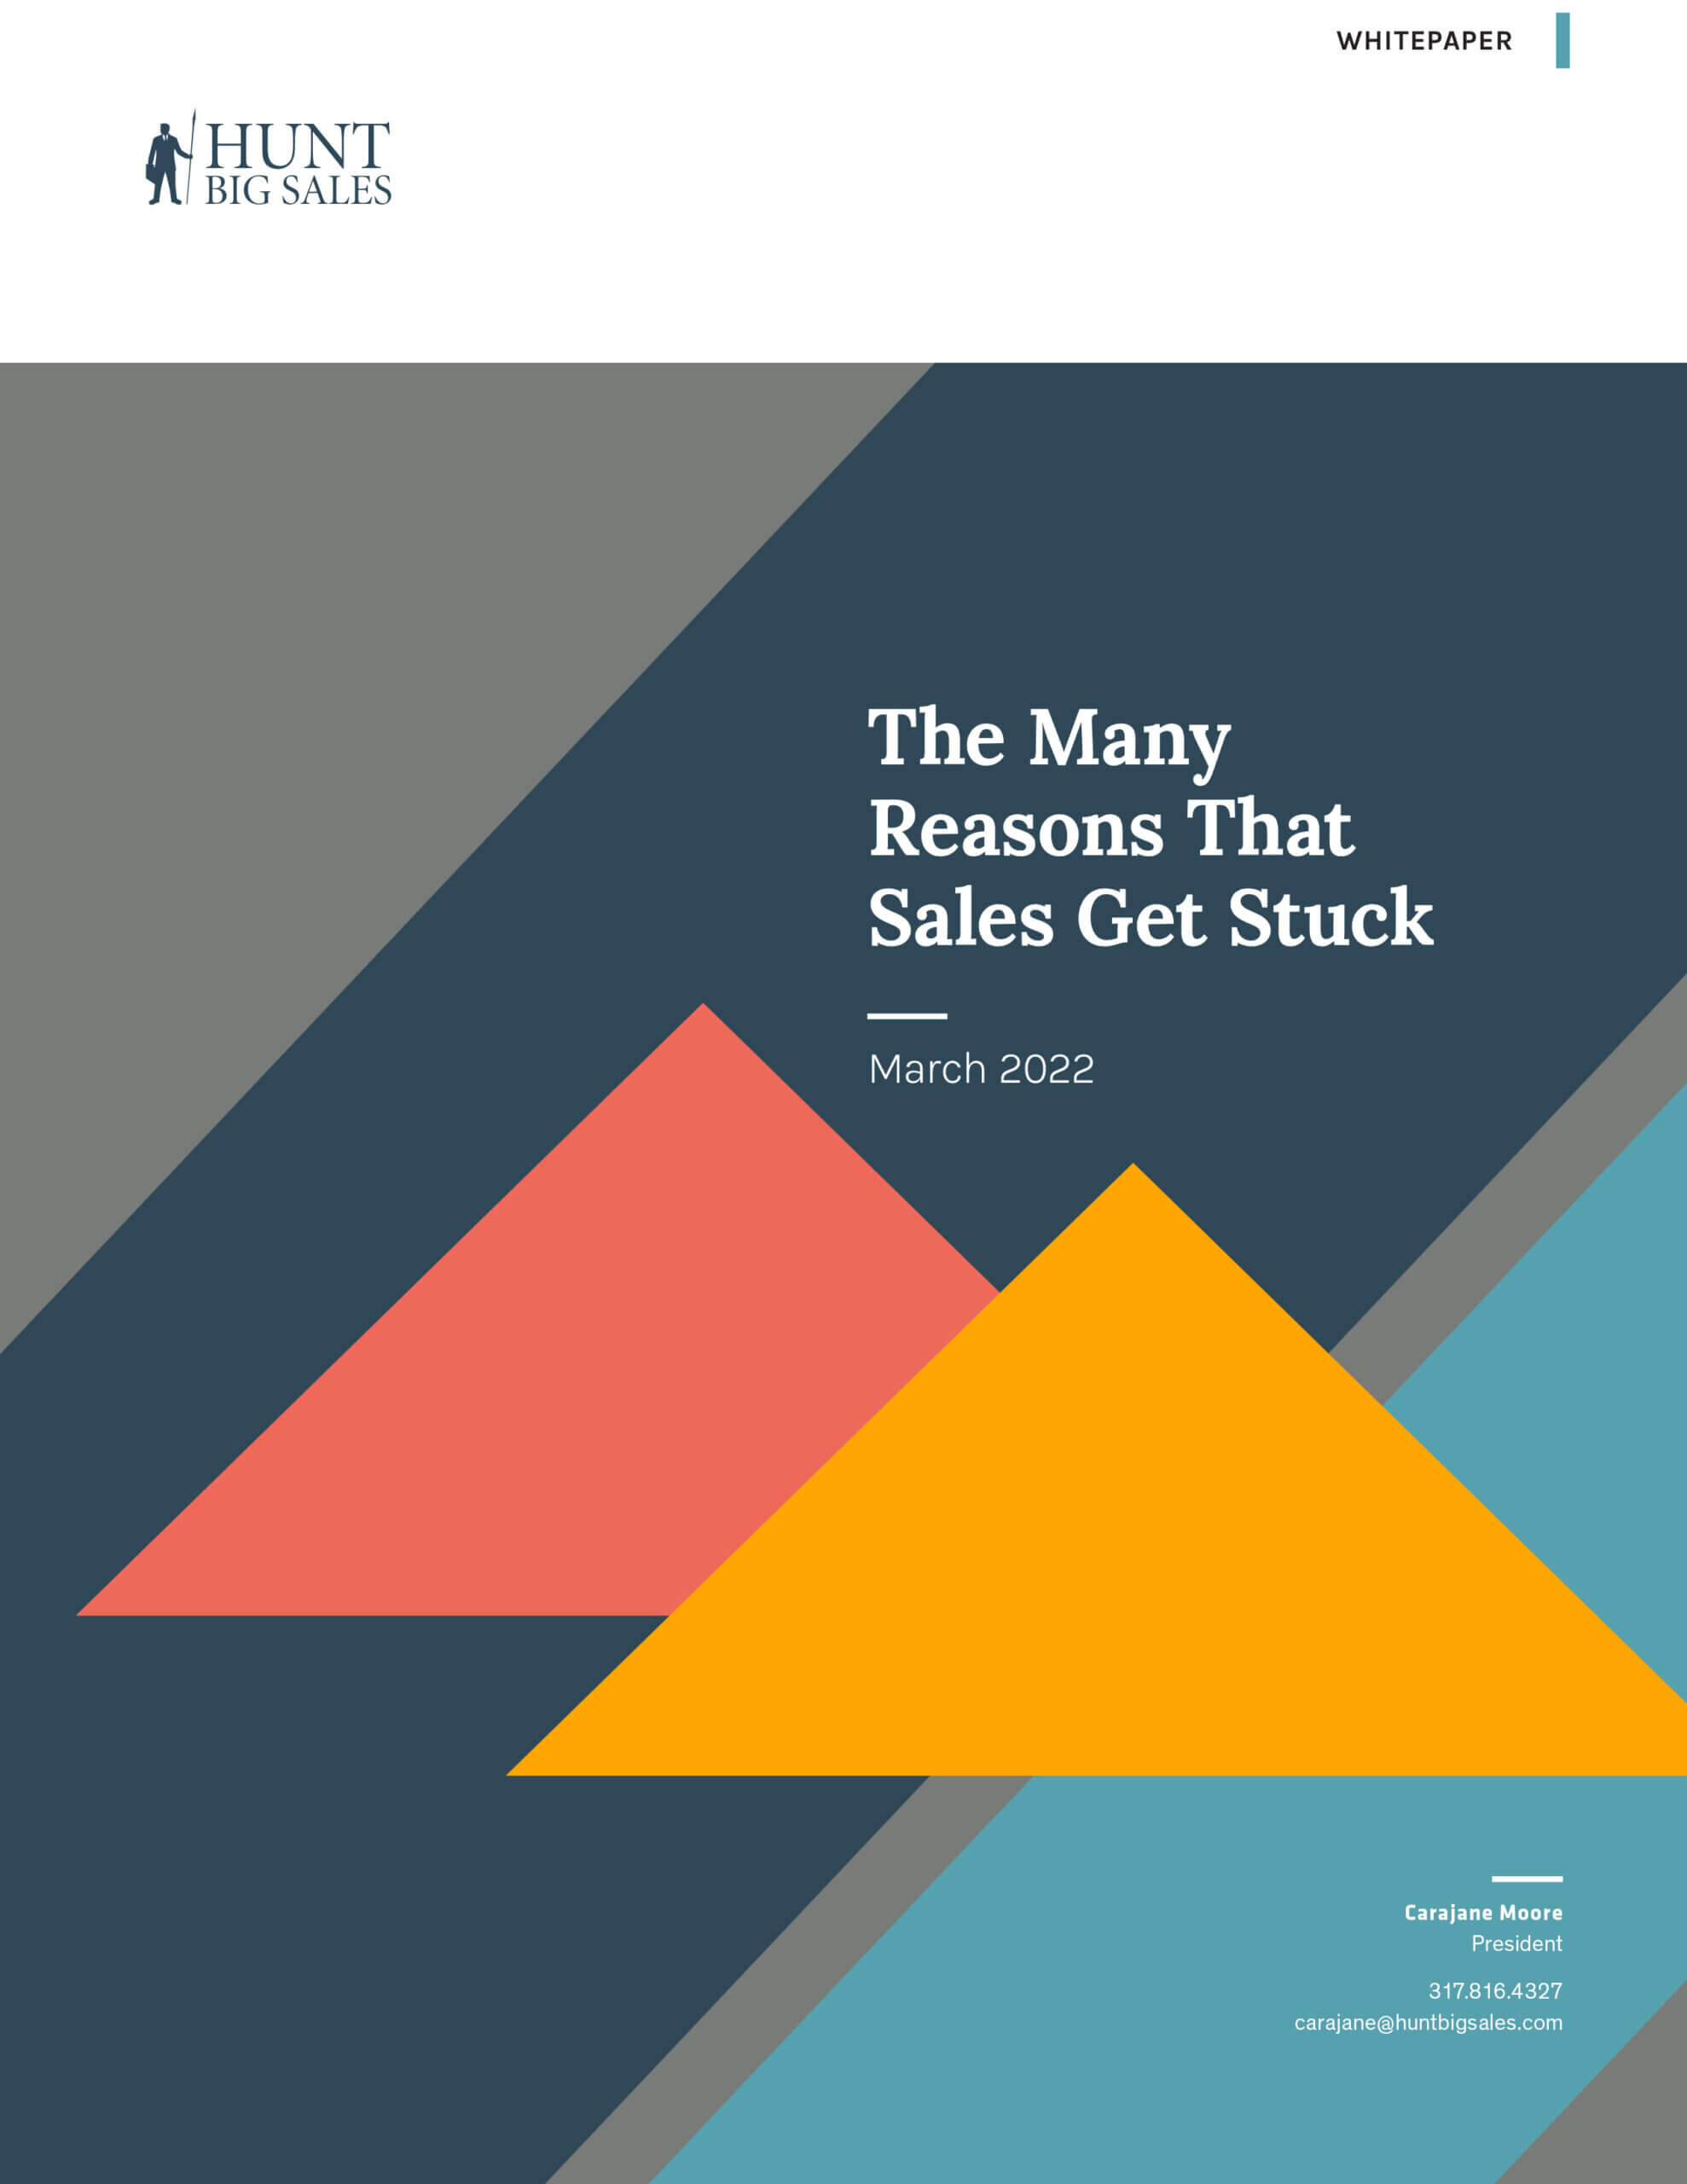 the-many-reasons-that-sales-get-stuck-whitepaper-cover